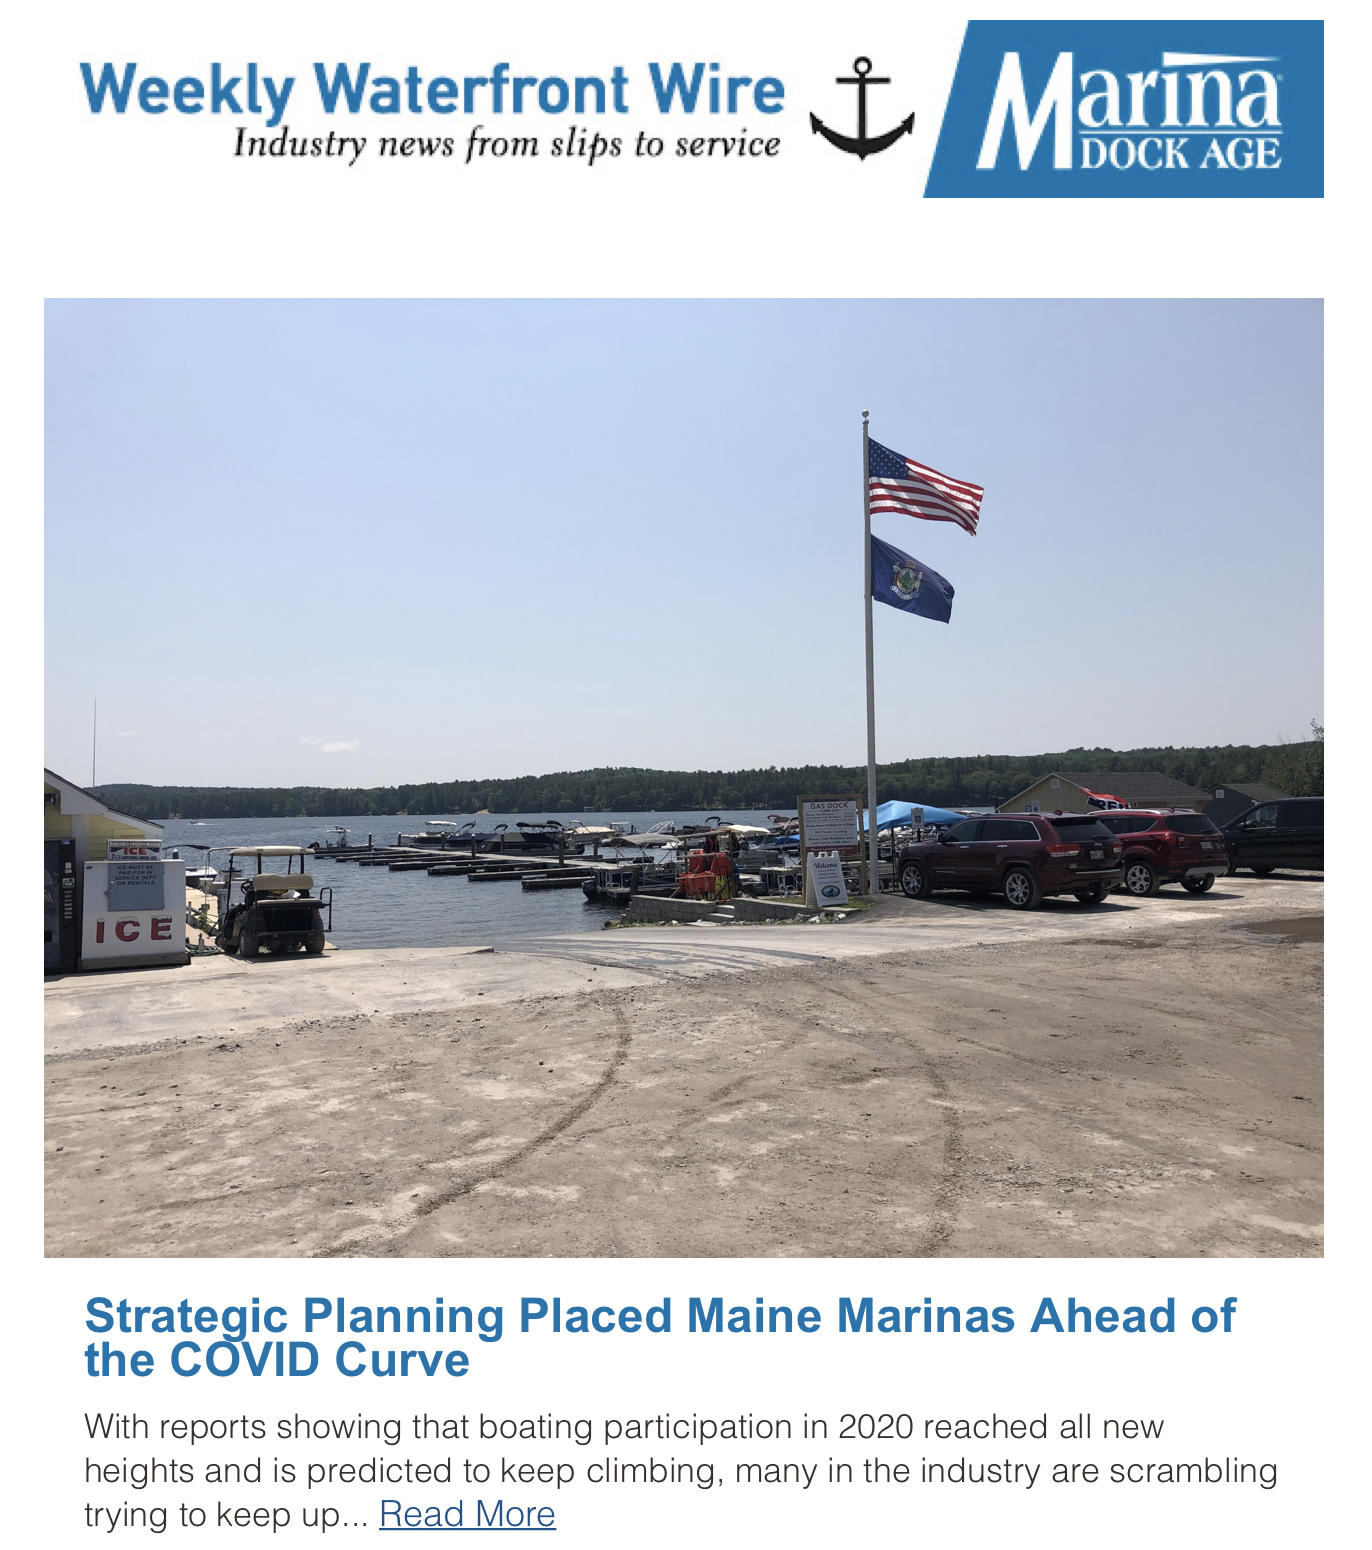 Strategic Planning Placed Maine Marinas Ahead of the COVID Curve